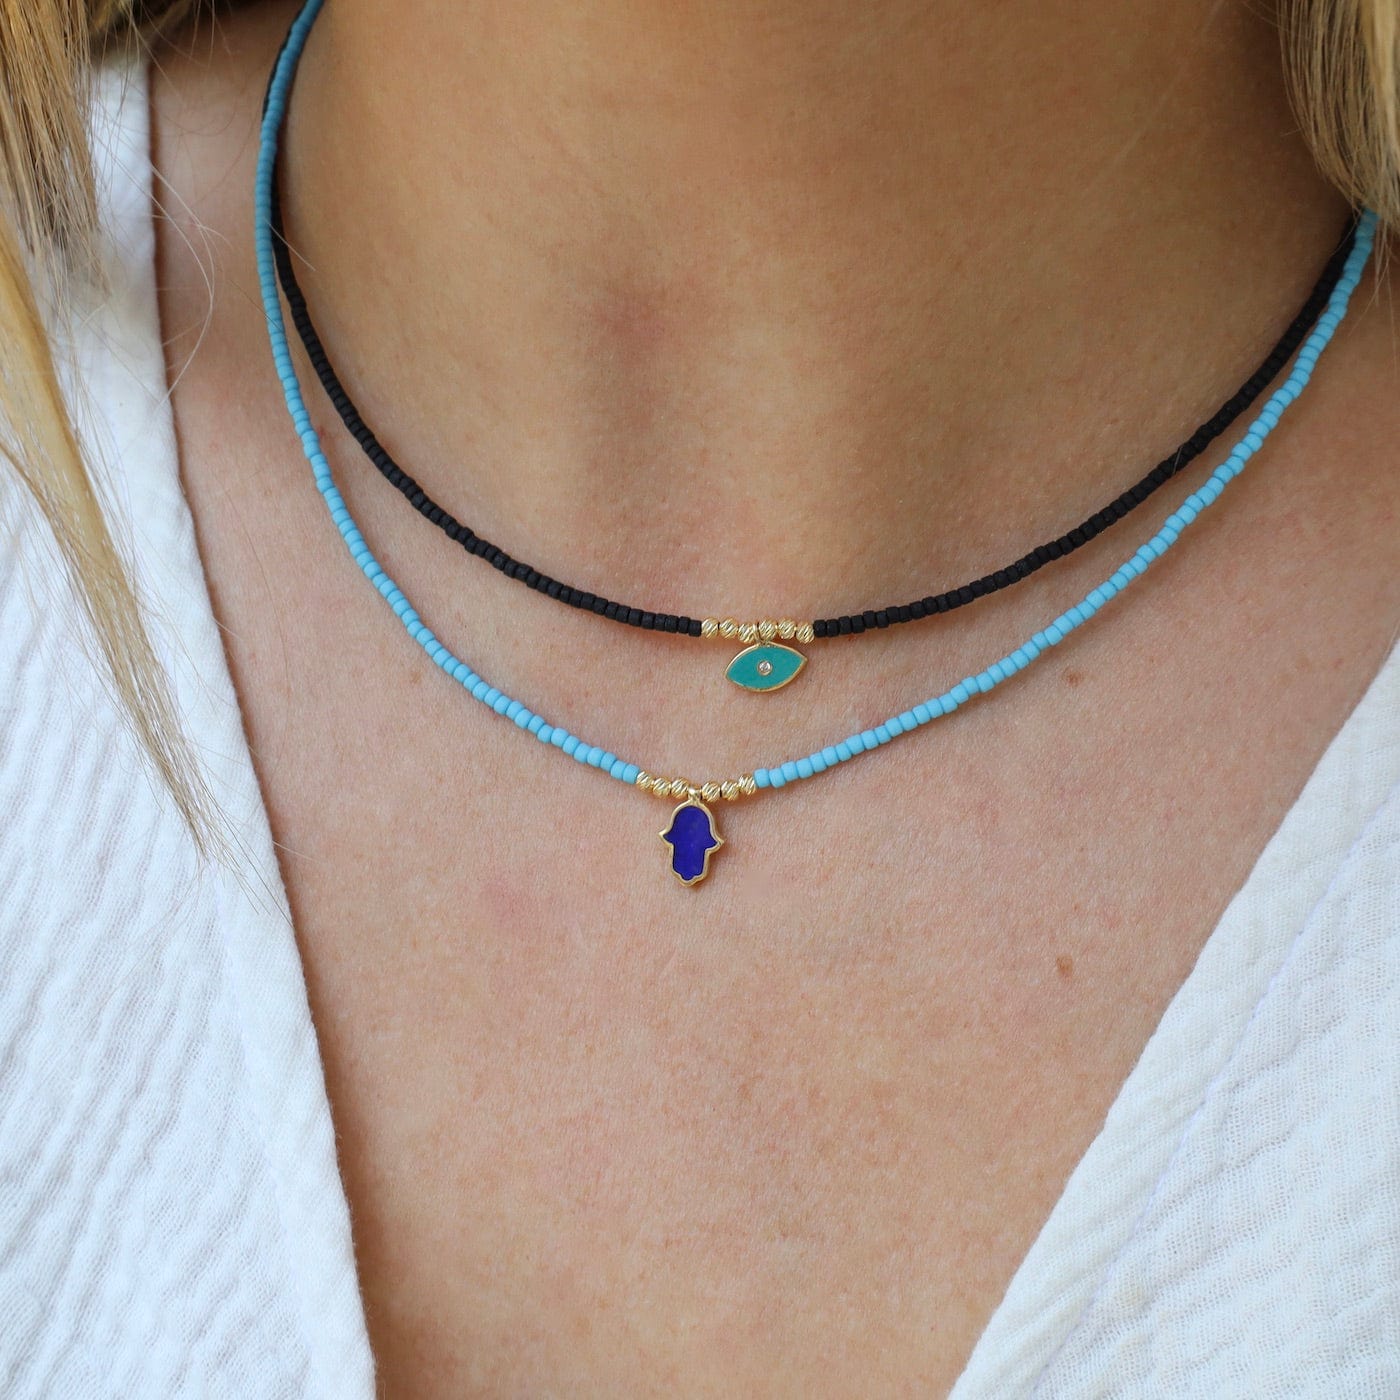 NKL-GPL Turquoise Beaded Necklace with Hamsa